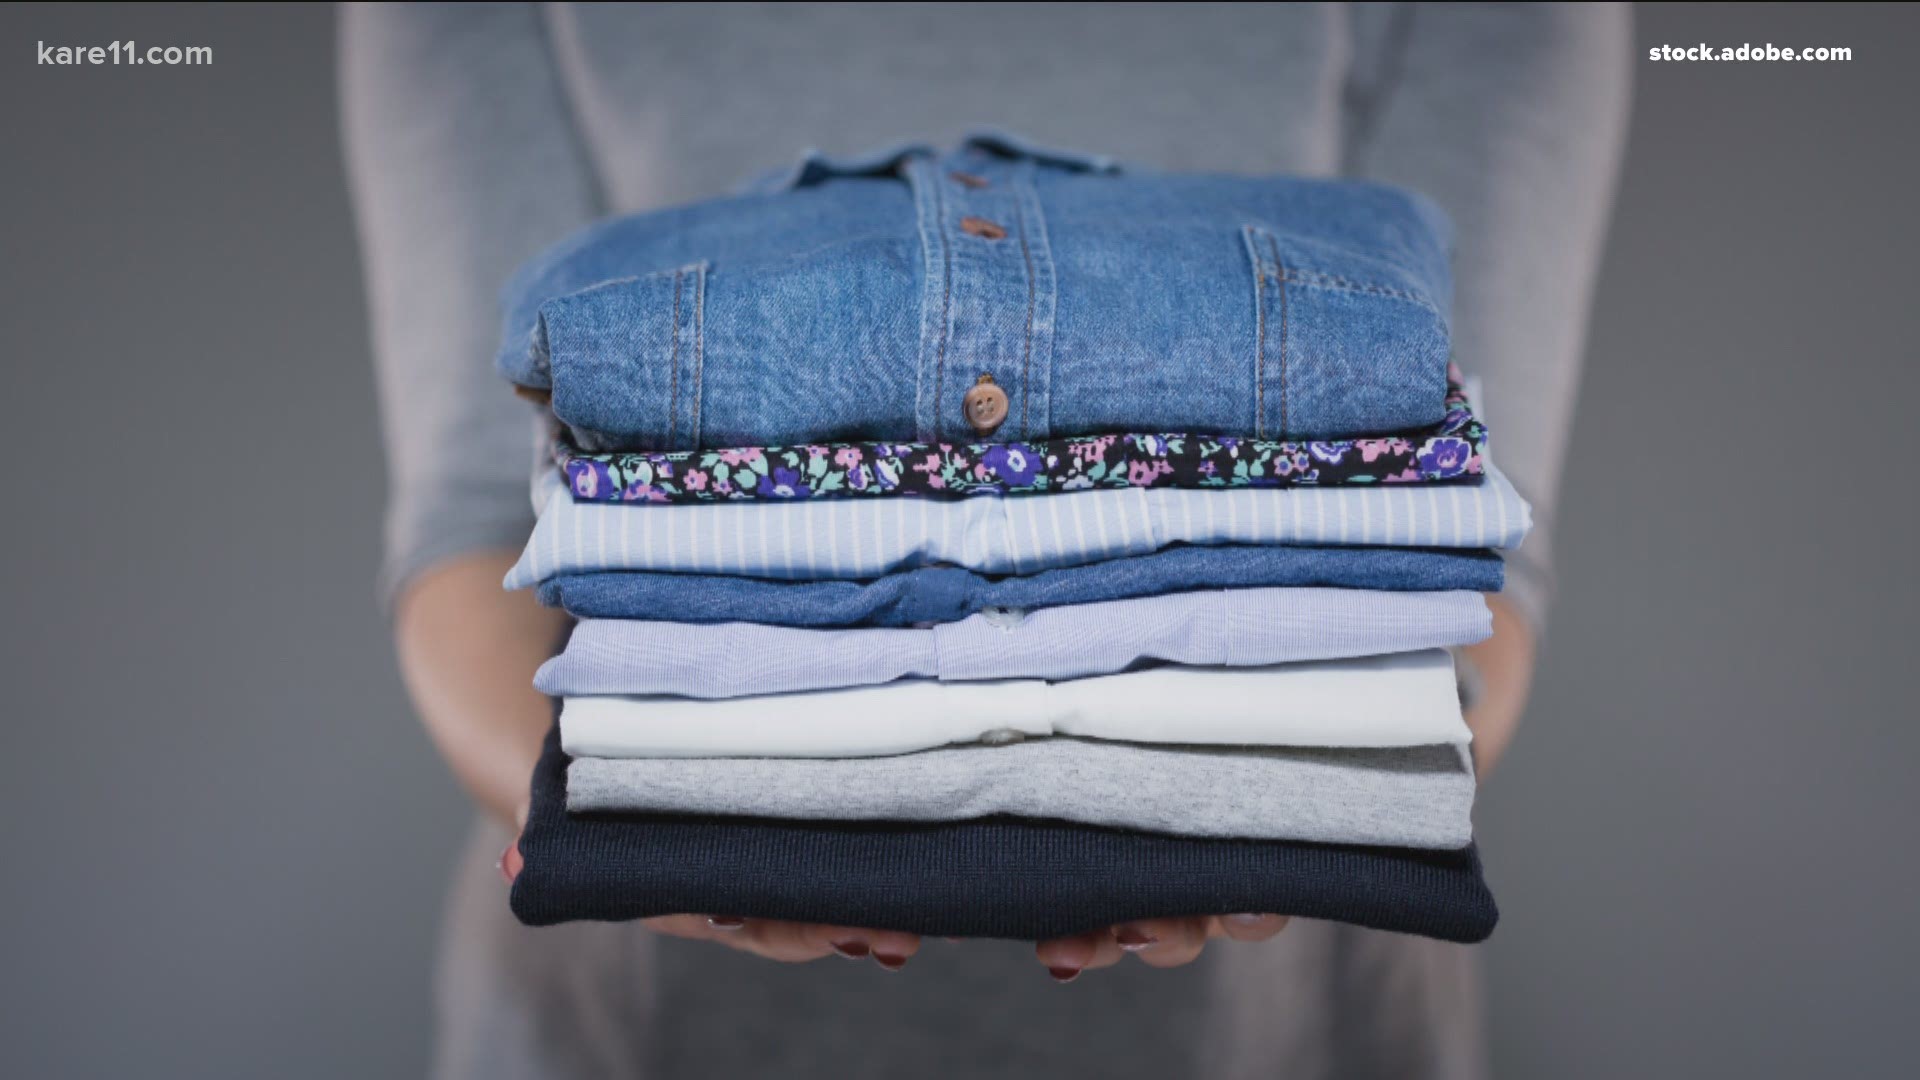 You can wear jeans 9 or 10 times between washings. Sweaters? Once a season is all you need to keep them clean, says one expert.